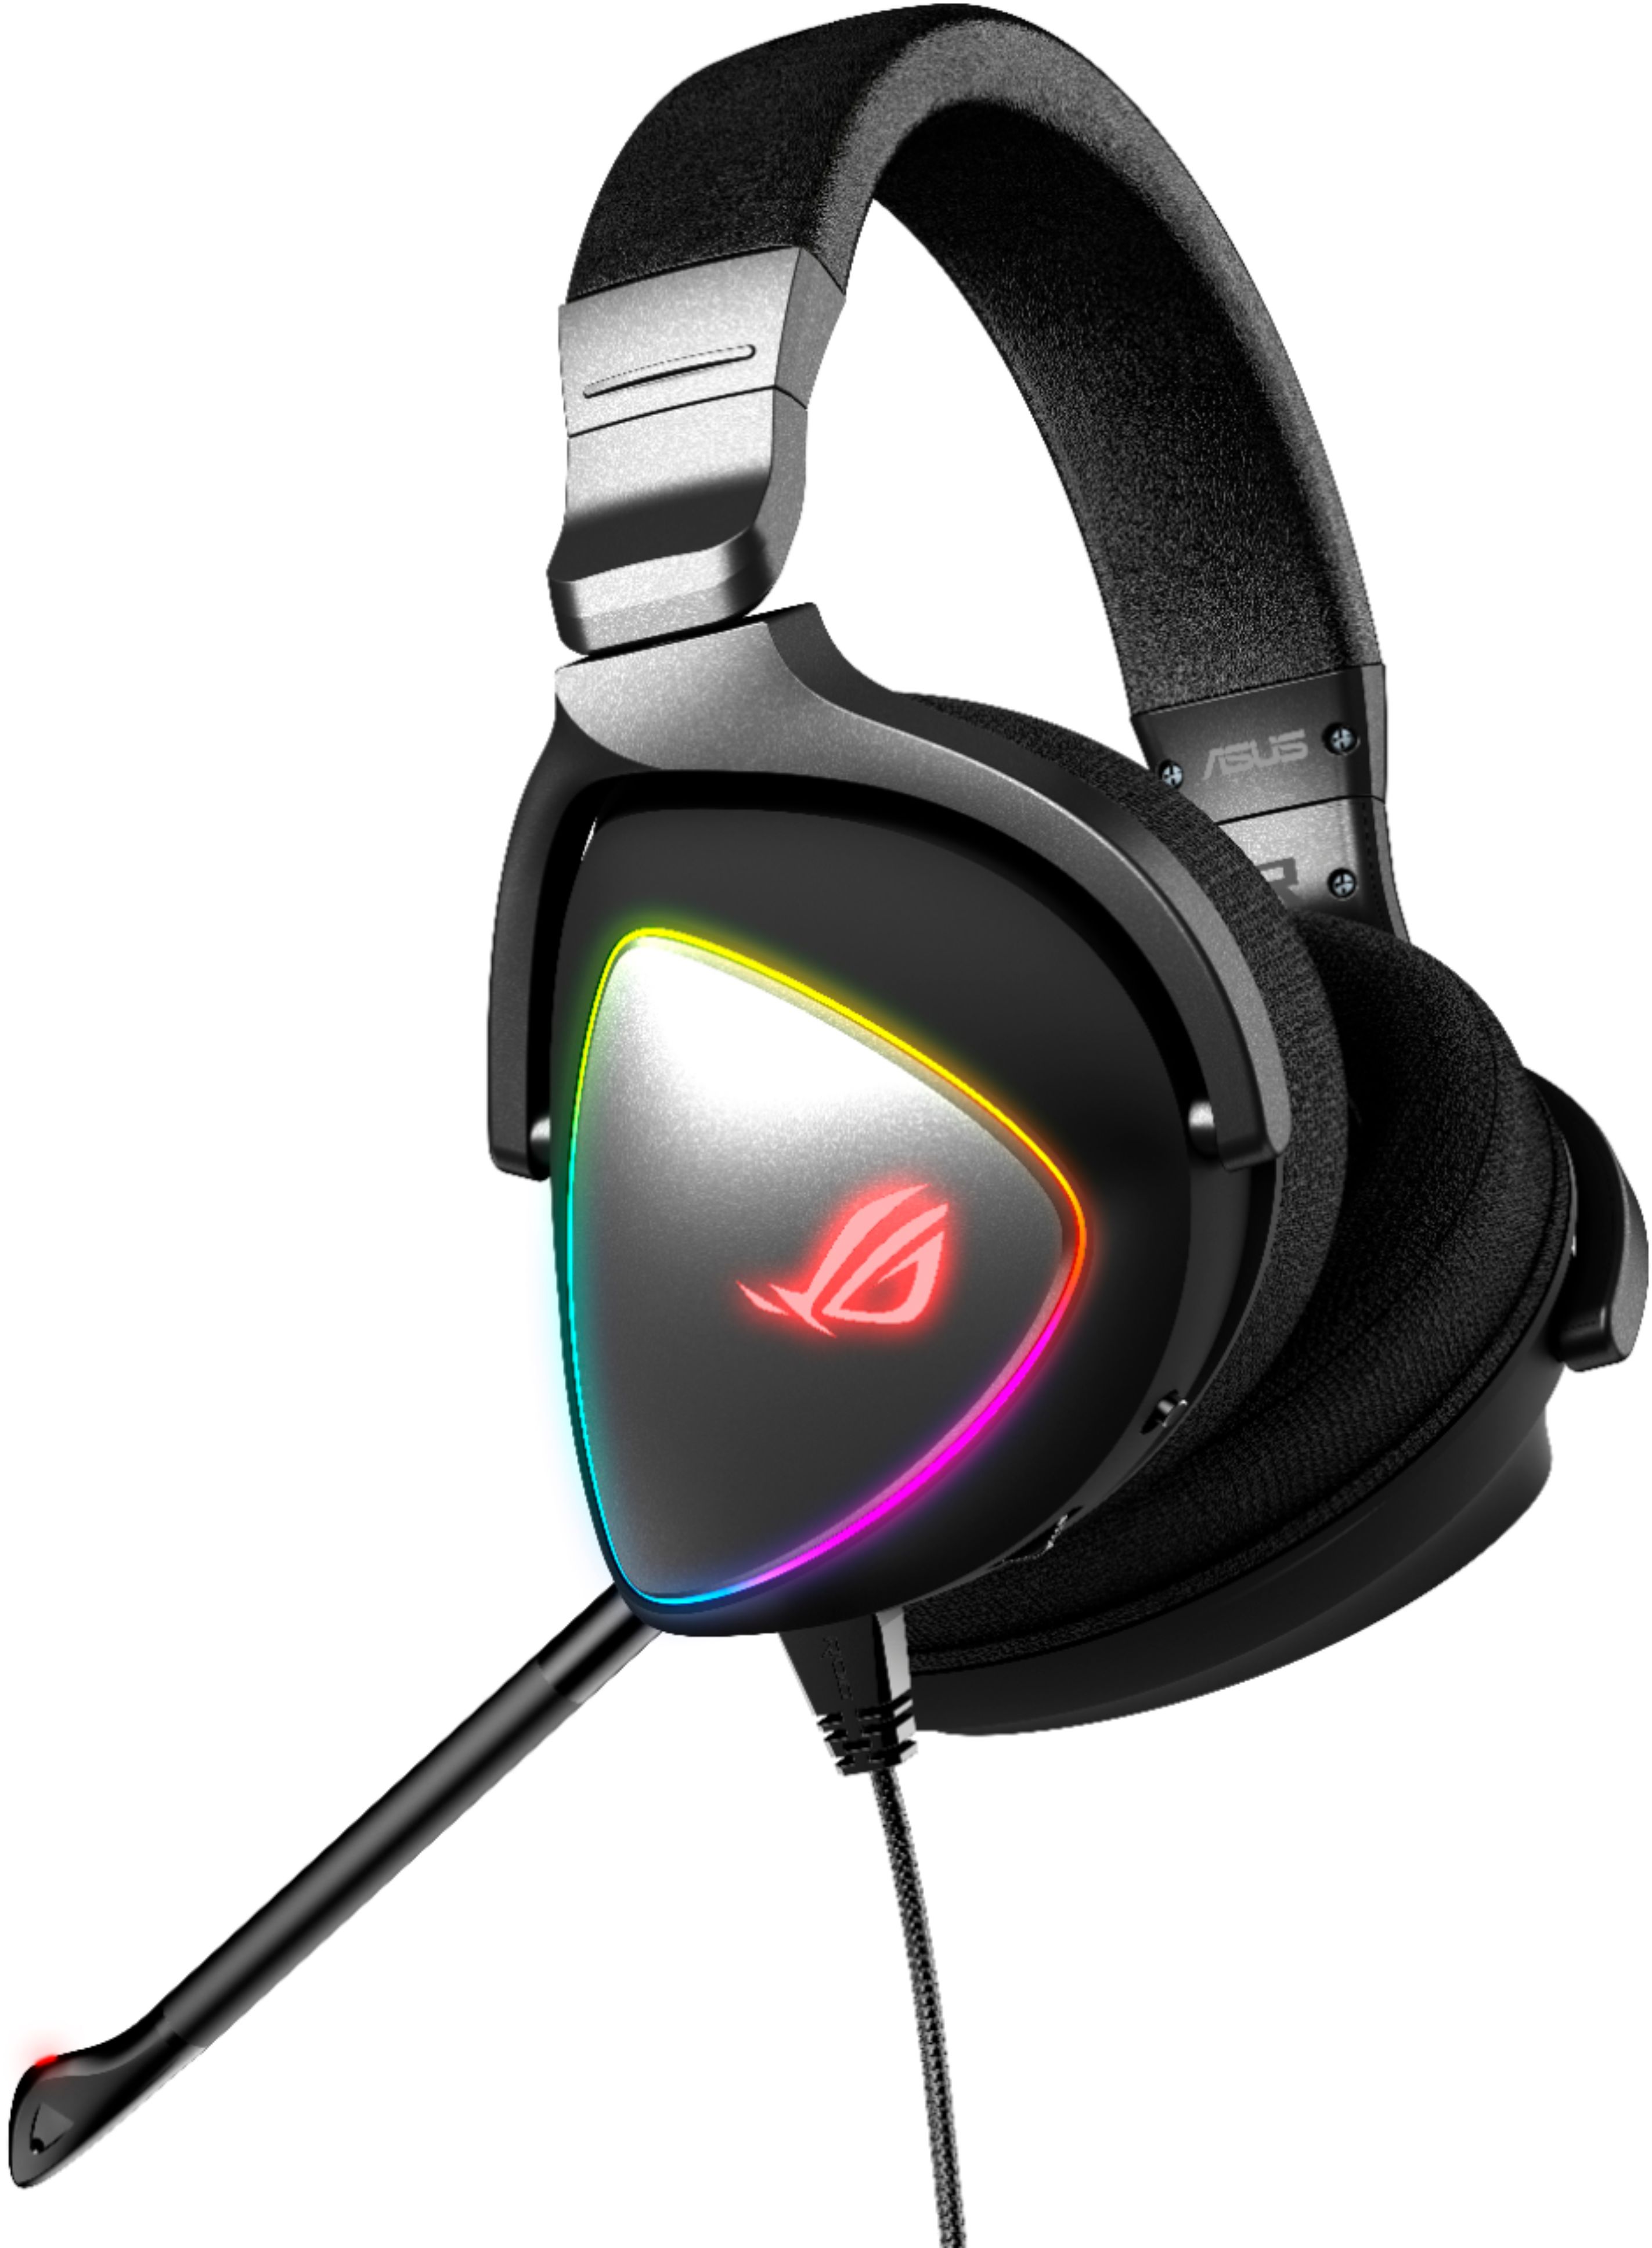 Left View: ASUS - ROG Delta RGB Wired Stereo Gaming Headset for PC, Mac, PS4, Nintendo Switch and Mobile Devices - Black